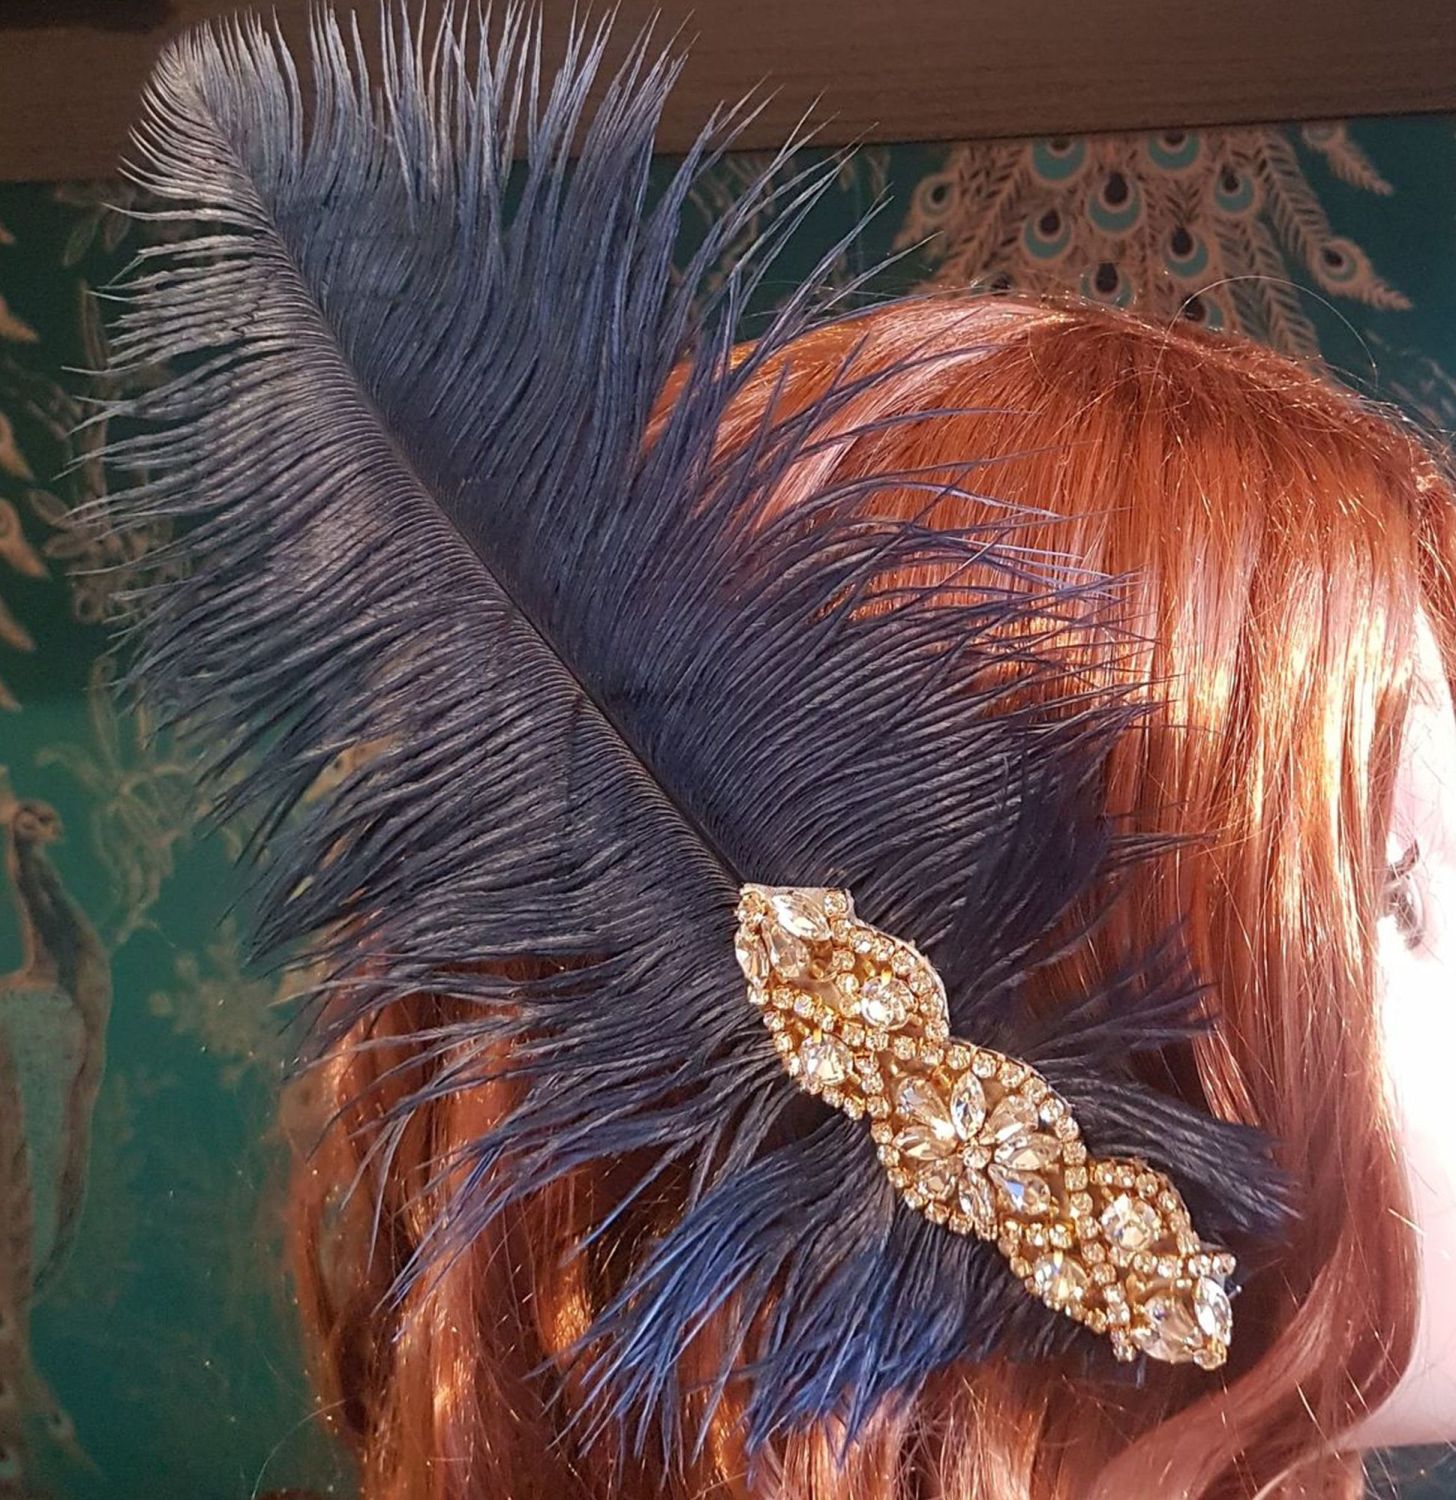 Finding the Best Feathers for Millinery: HATalk Hat Making Hints